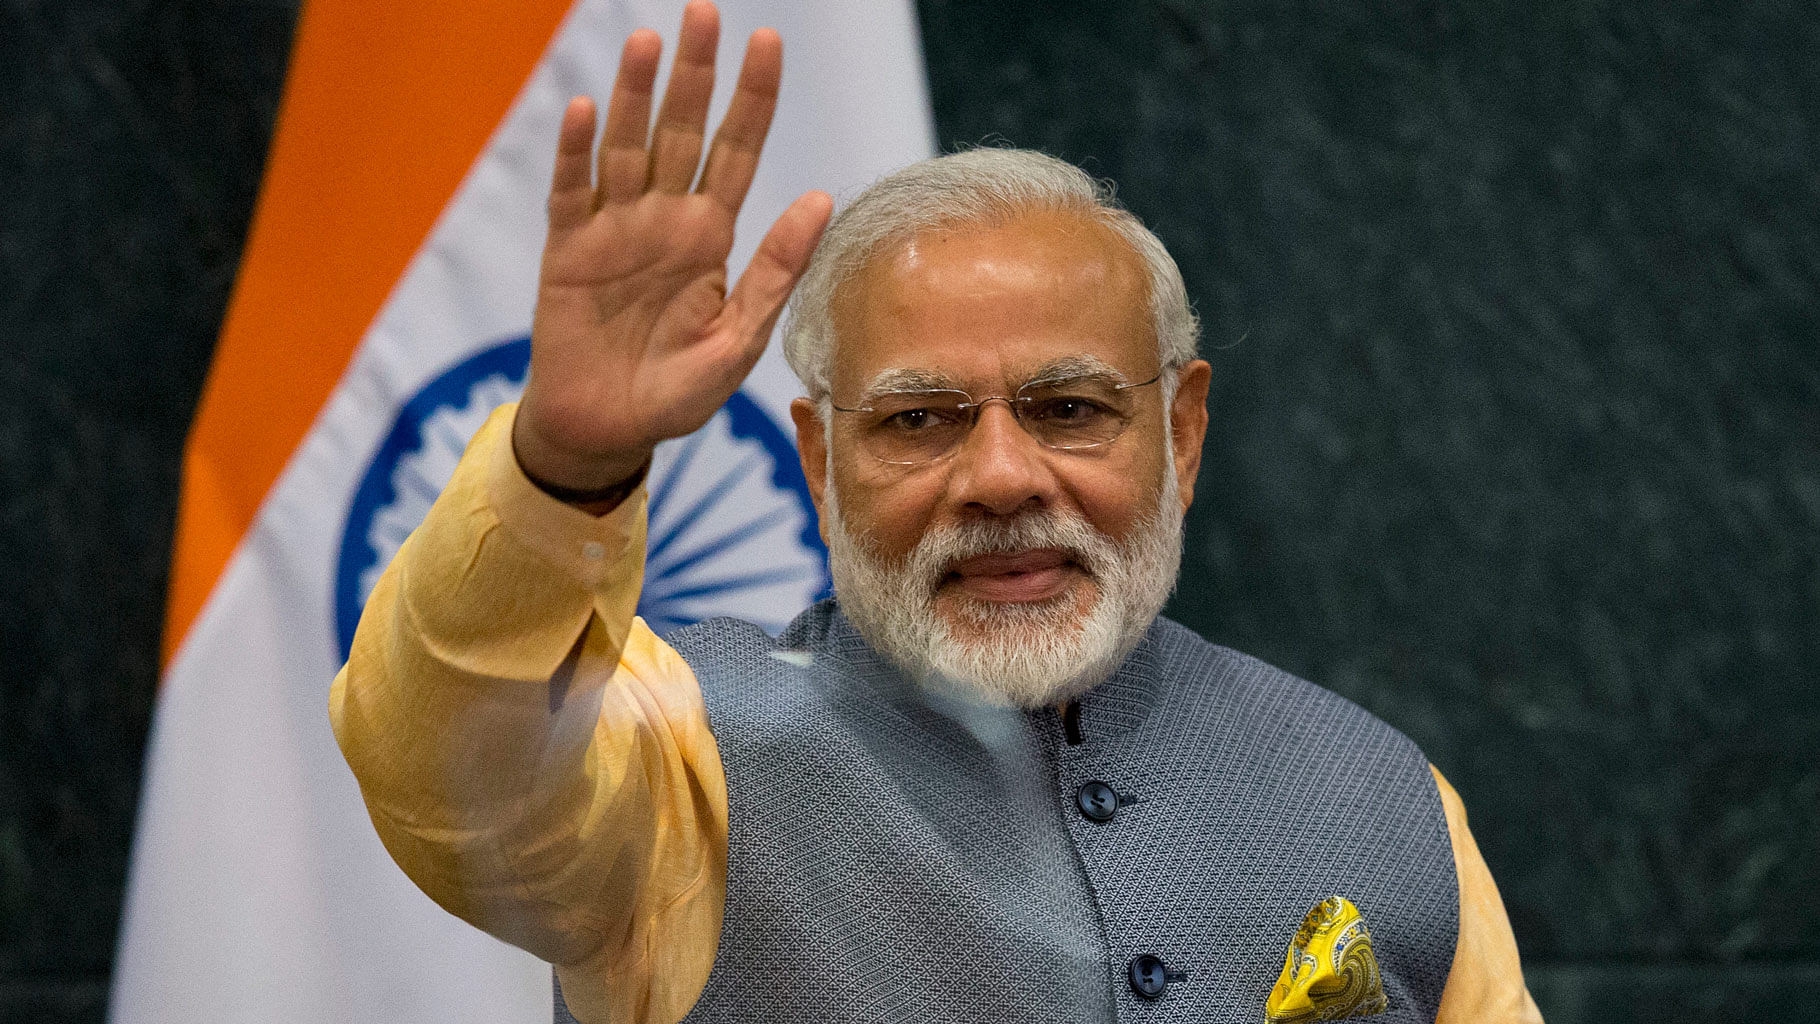 

Prime Minister Modi waves in Mexico on the last day of his five-nation tour. (Photo: AP)